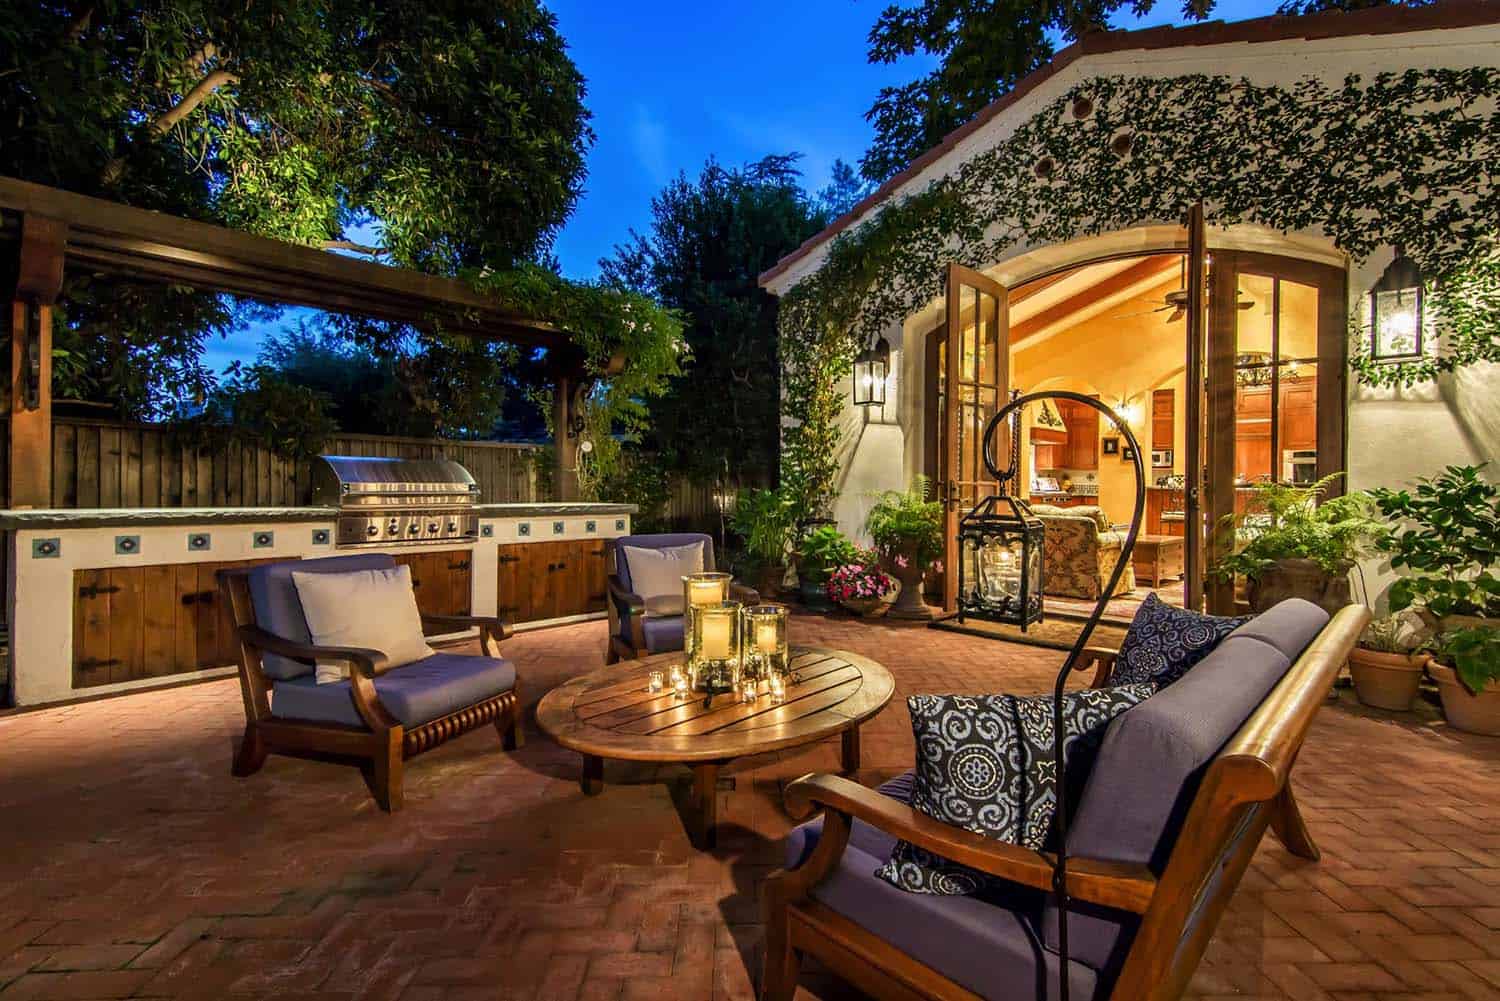 25 Covered Outdoor Kitchen Tips With Stunning Results Talkdecor